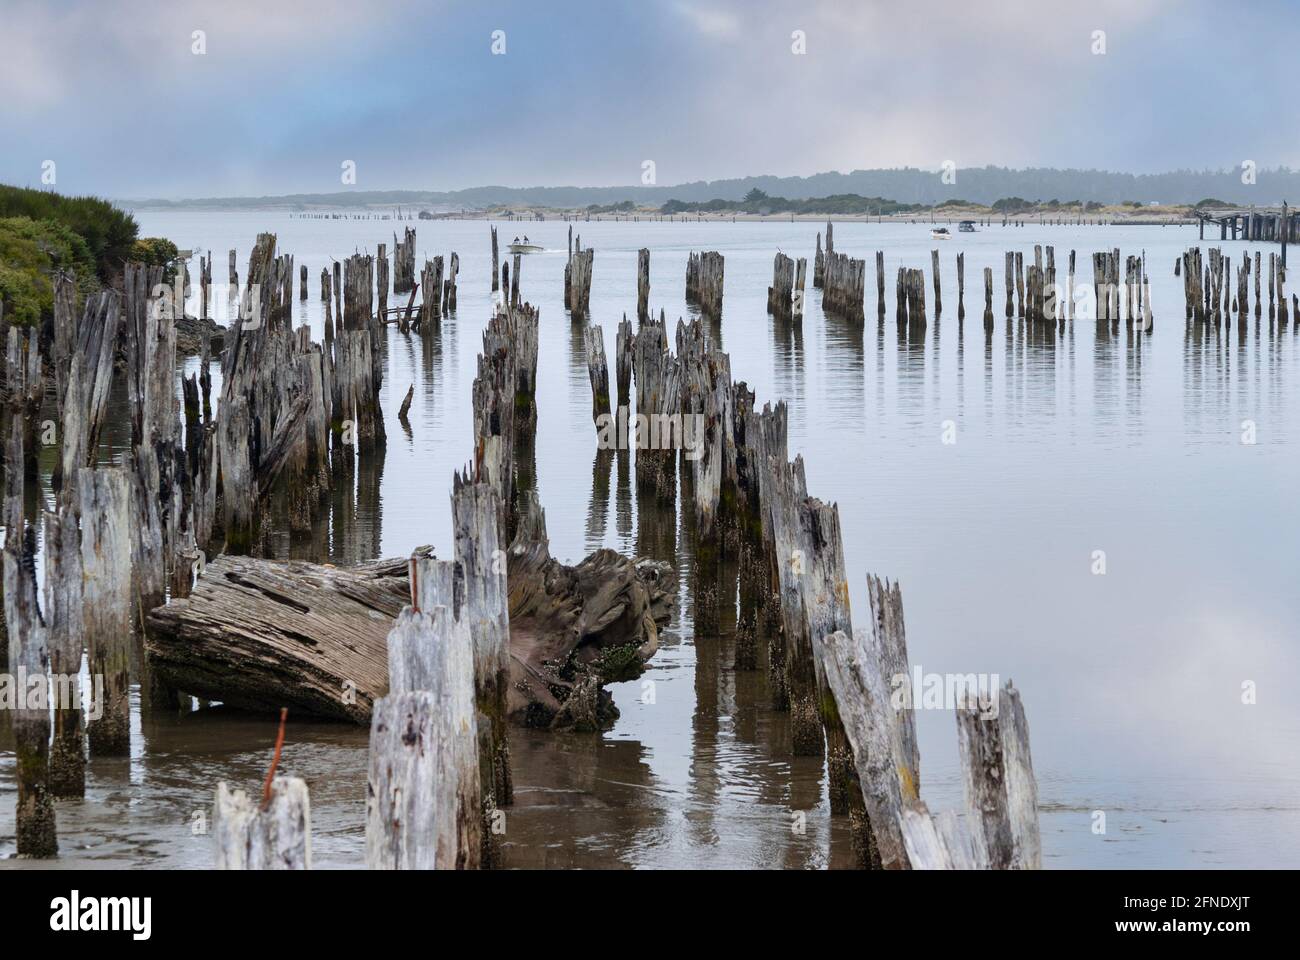 Old rotten wharf pilings stretched out into the sea off the coast of Oregon, USA. Stock Photo